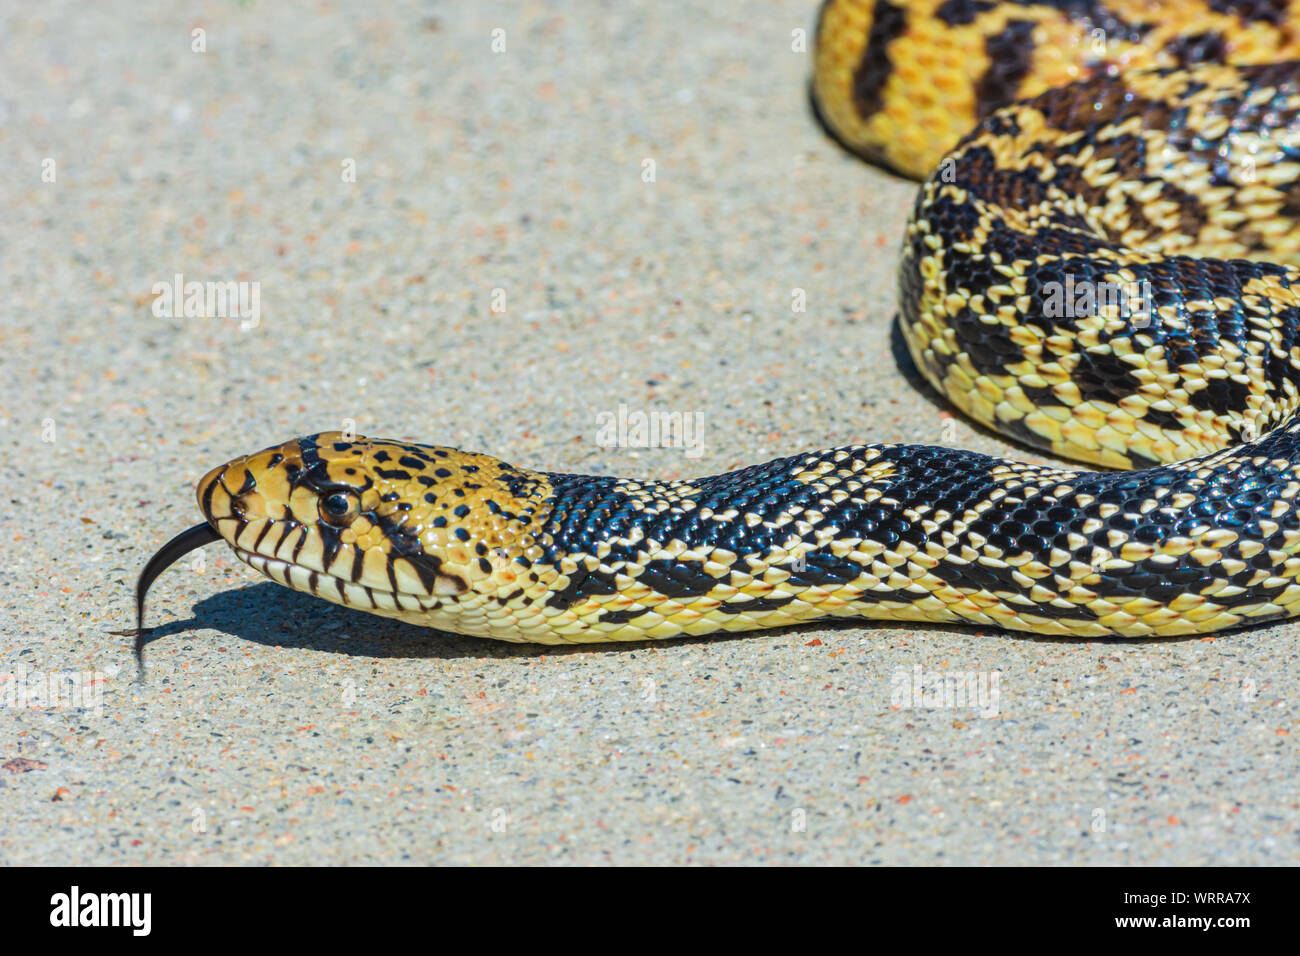 Bullsnake (Pituophis catenifer sayi), currently considered a subspecies of the look-a-like Gopher snake (Pituophis catenifer), Castle Rock CO US. Stock Photo